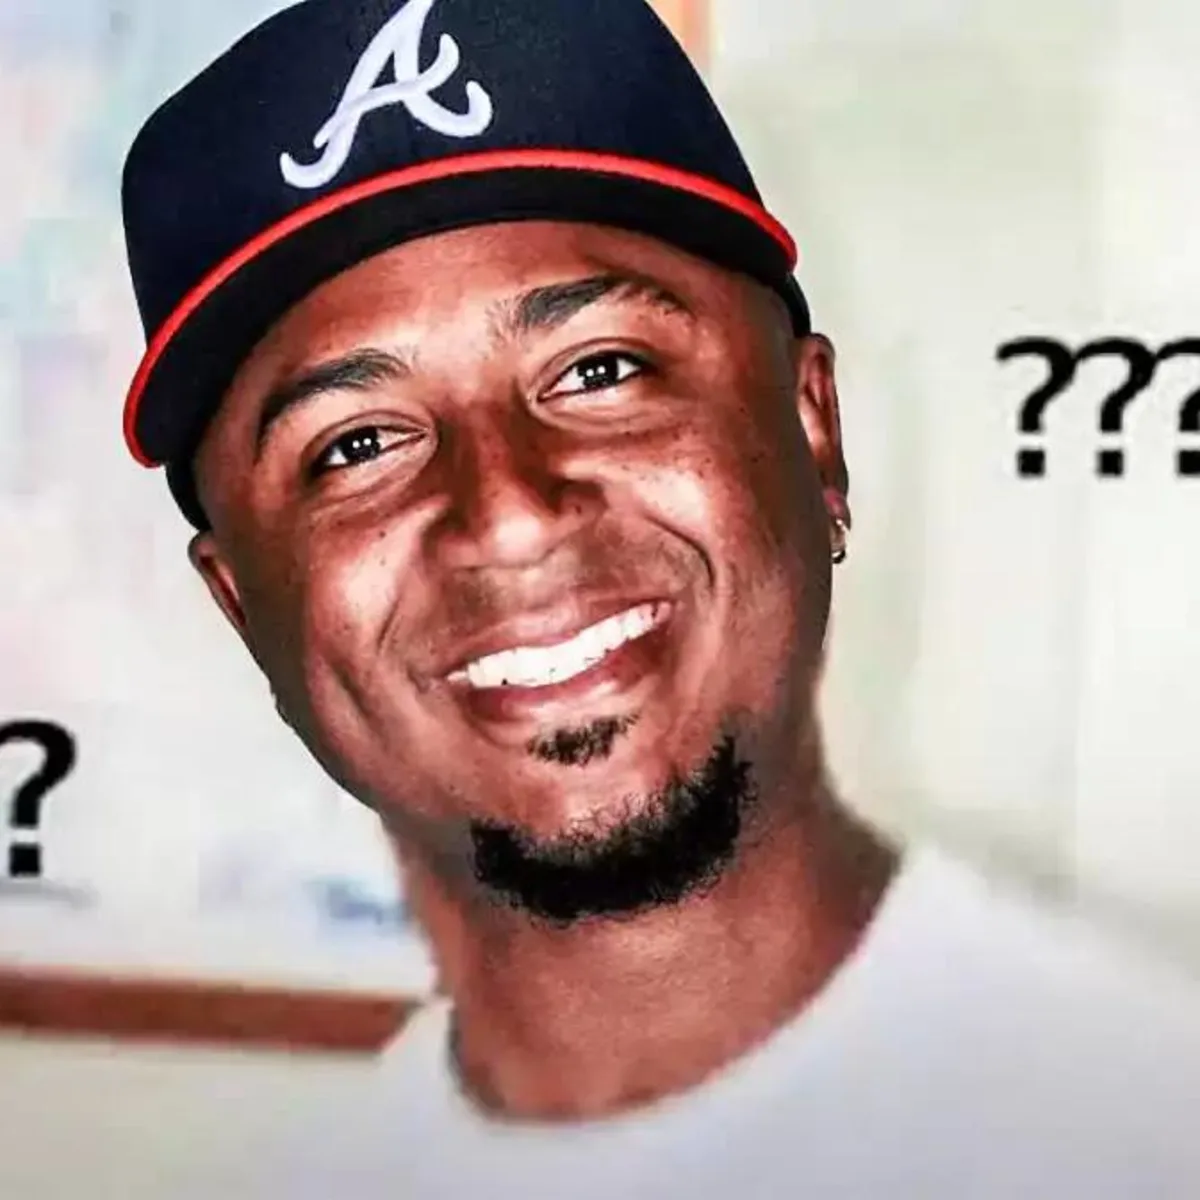 The Braves probably need to rethink Ozzie Albies in the lead off spot -  Battery Power